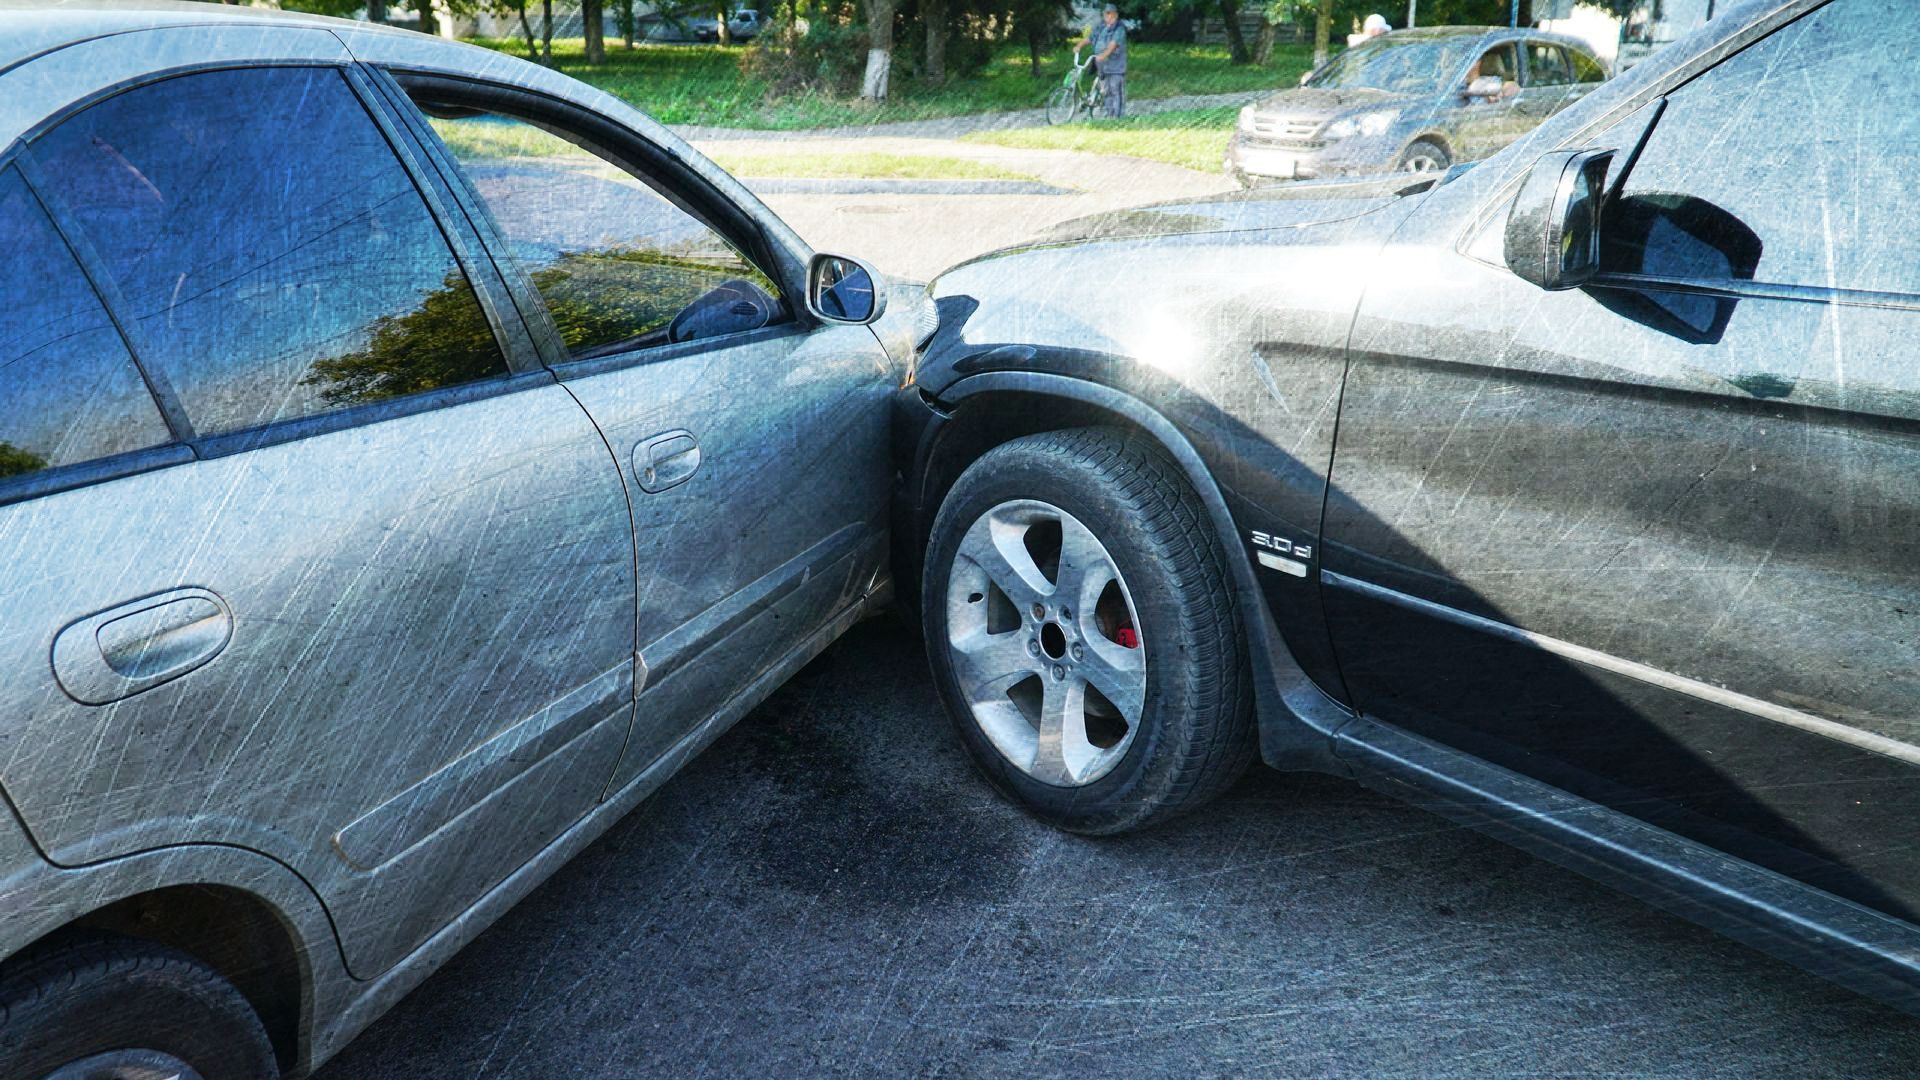 How Do You Prove Another Driver Caused Your Car Accident?